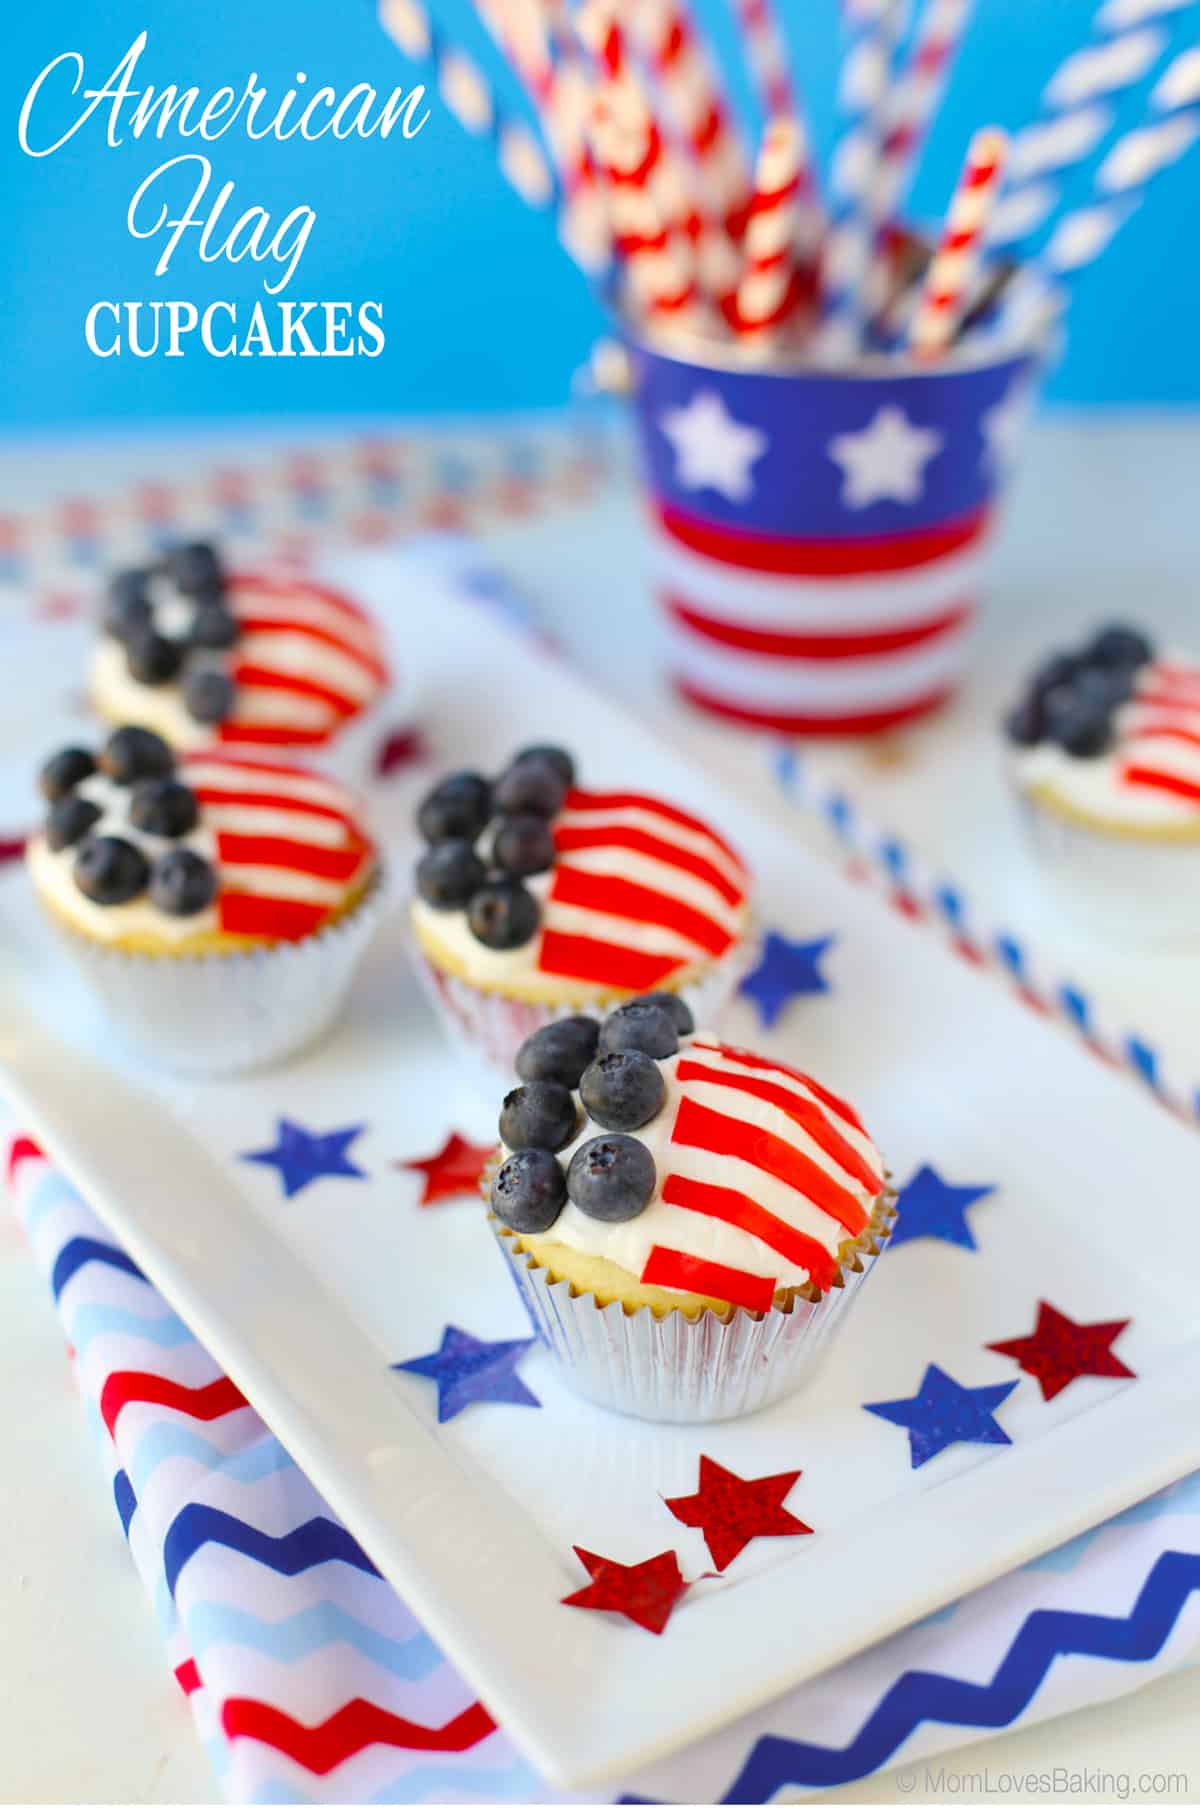 Vanilla cupcakes with white frosting, red fruit roll up stripes and blueberry stars to look like the flag.